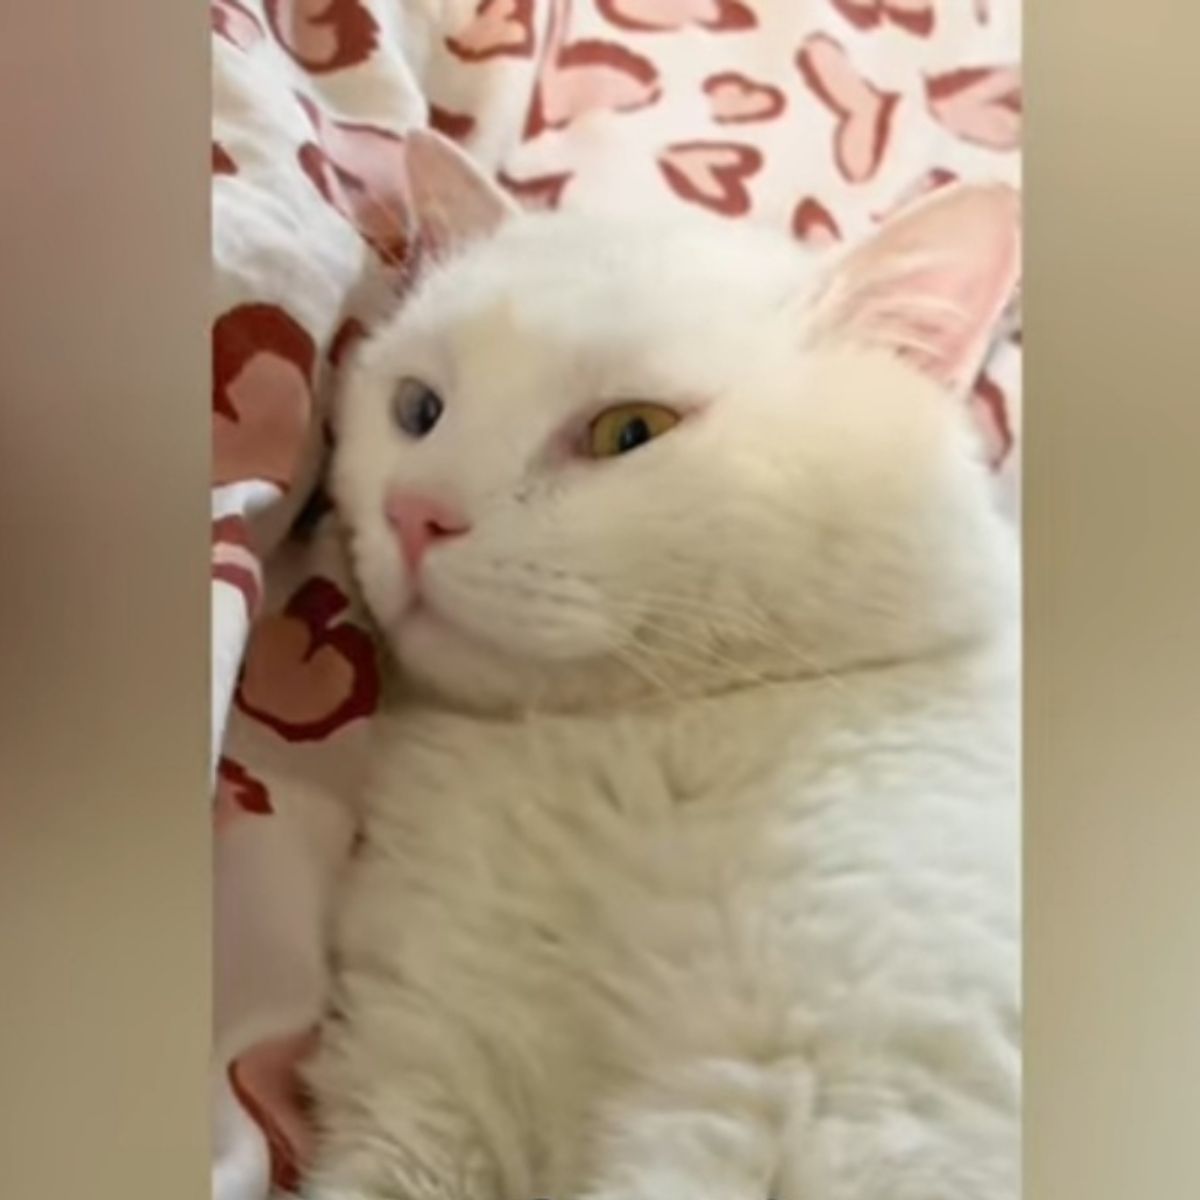 white cat on the bed